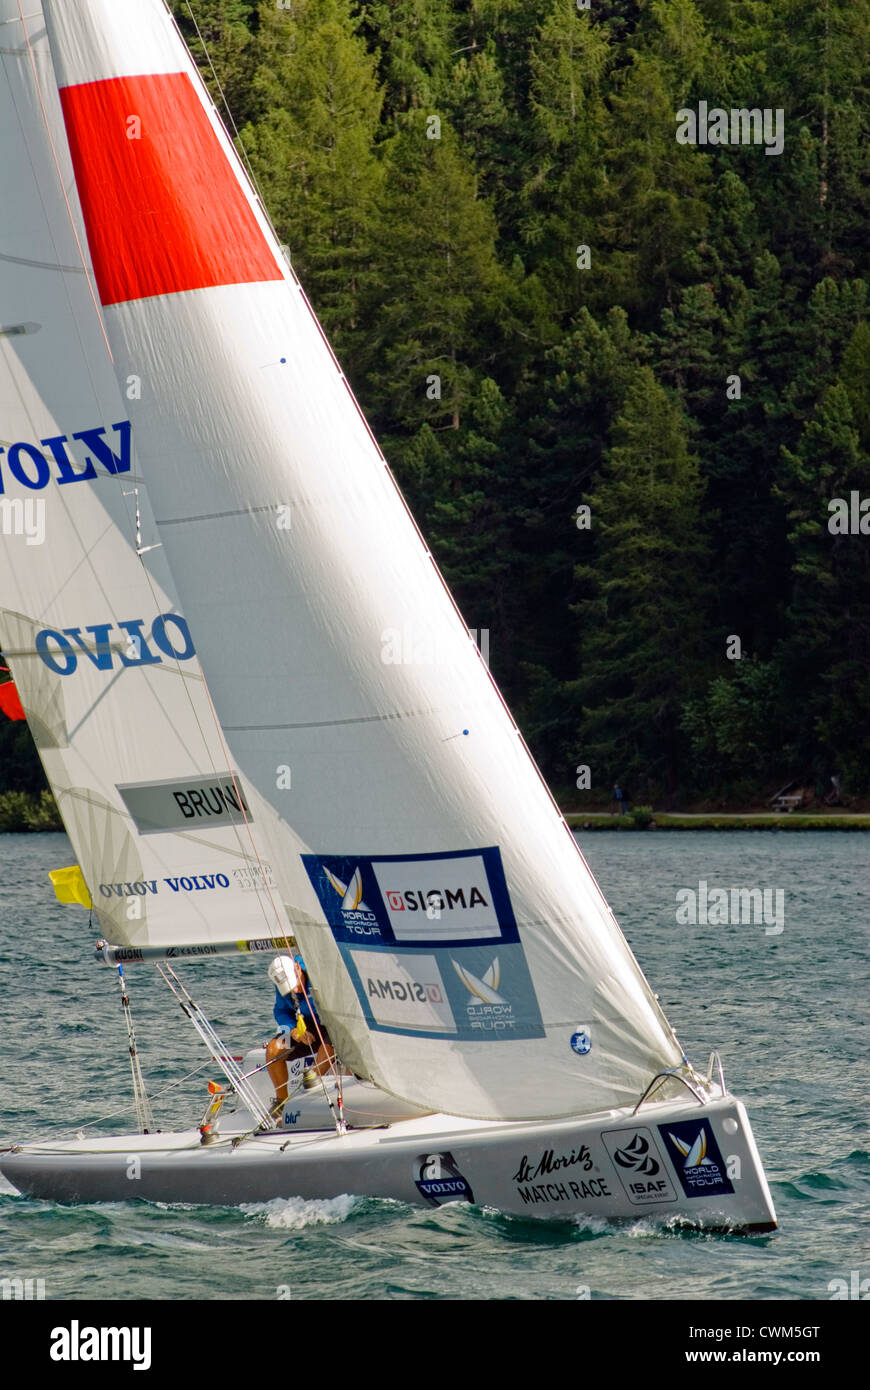 Sailing boats racing during the Match Race, St Moritz, Switzerland Stock Photo